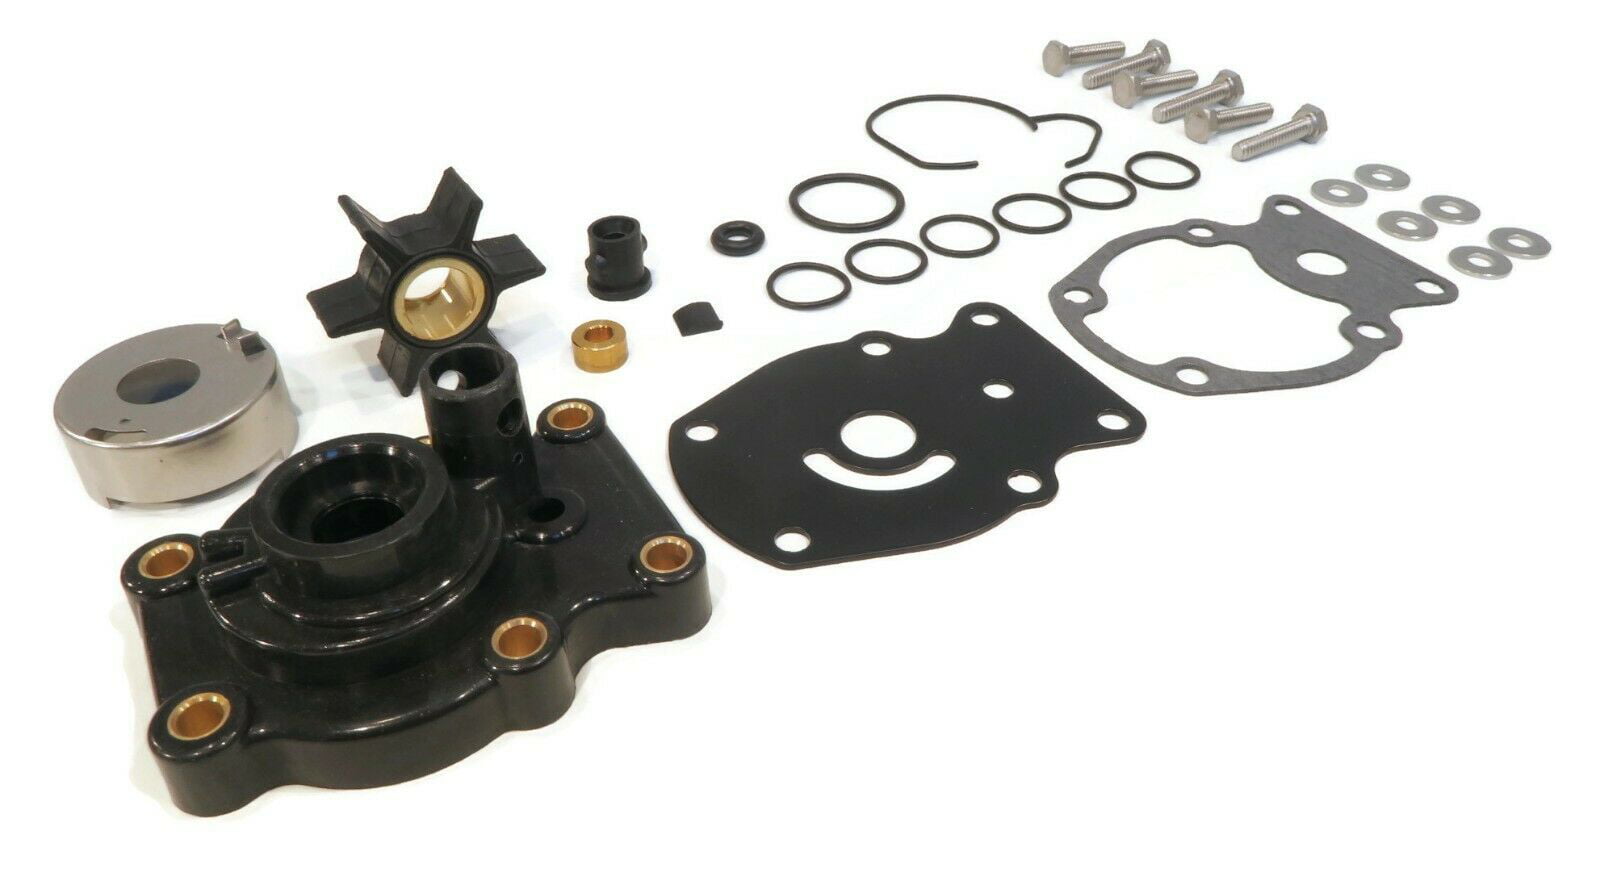 Water Pump Rebuild Kit with Housing Key Gasket & Plate Assy Impeller Cup